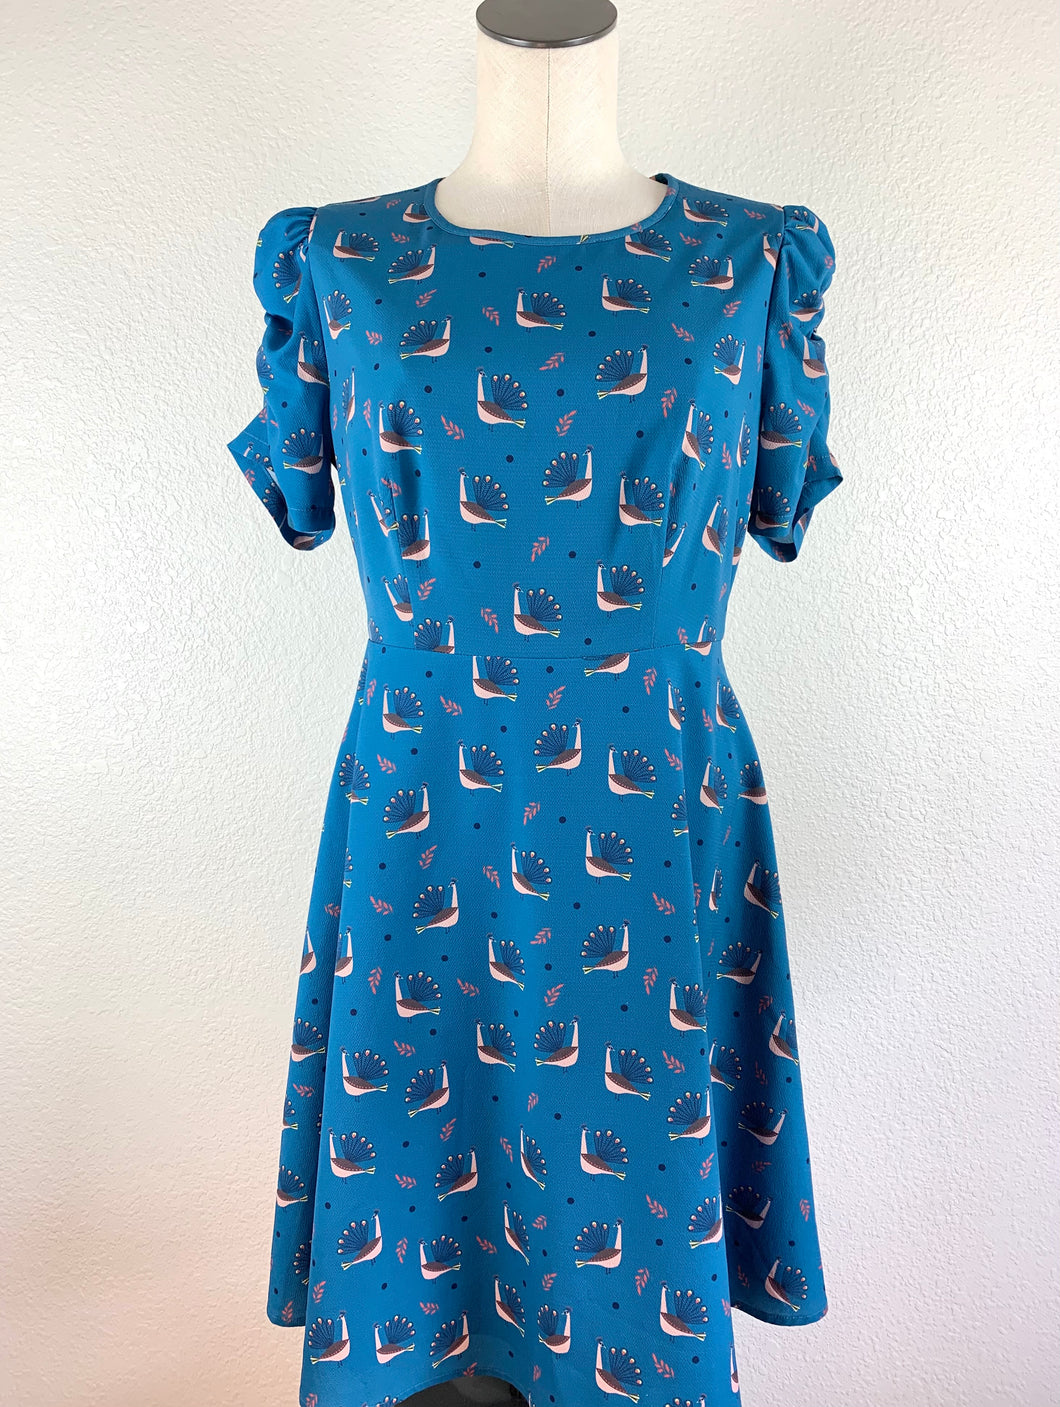 Yumi Peacock Printed A-line Dress size S